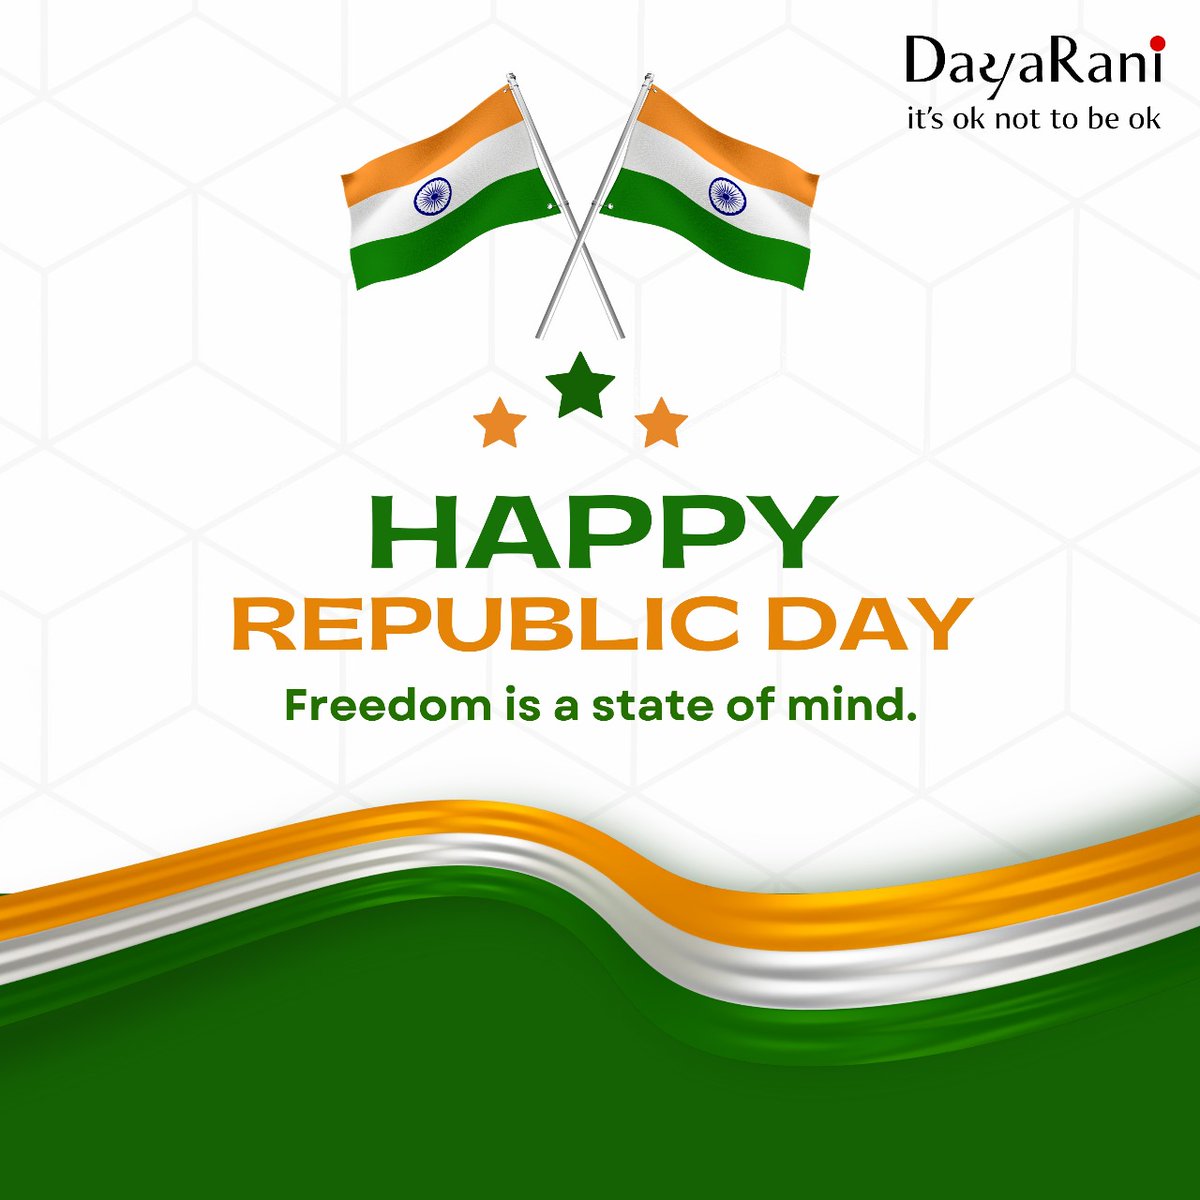 May The Glory Of #RepublicDay Be With You Forever.
Happy Republic Day!

#JaiHind 

#mentalwellness  #India #proudnation #wellbeing #dayaraniwellness